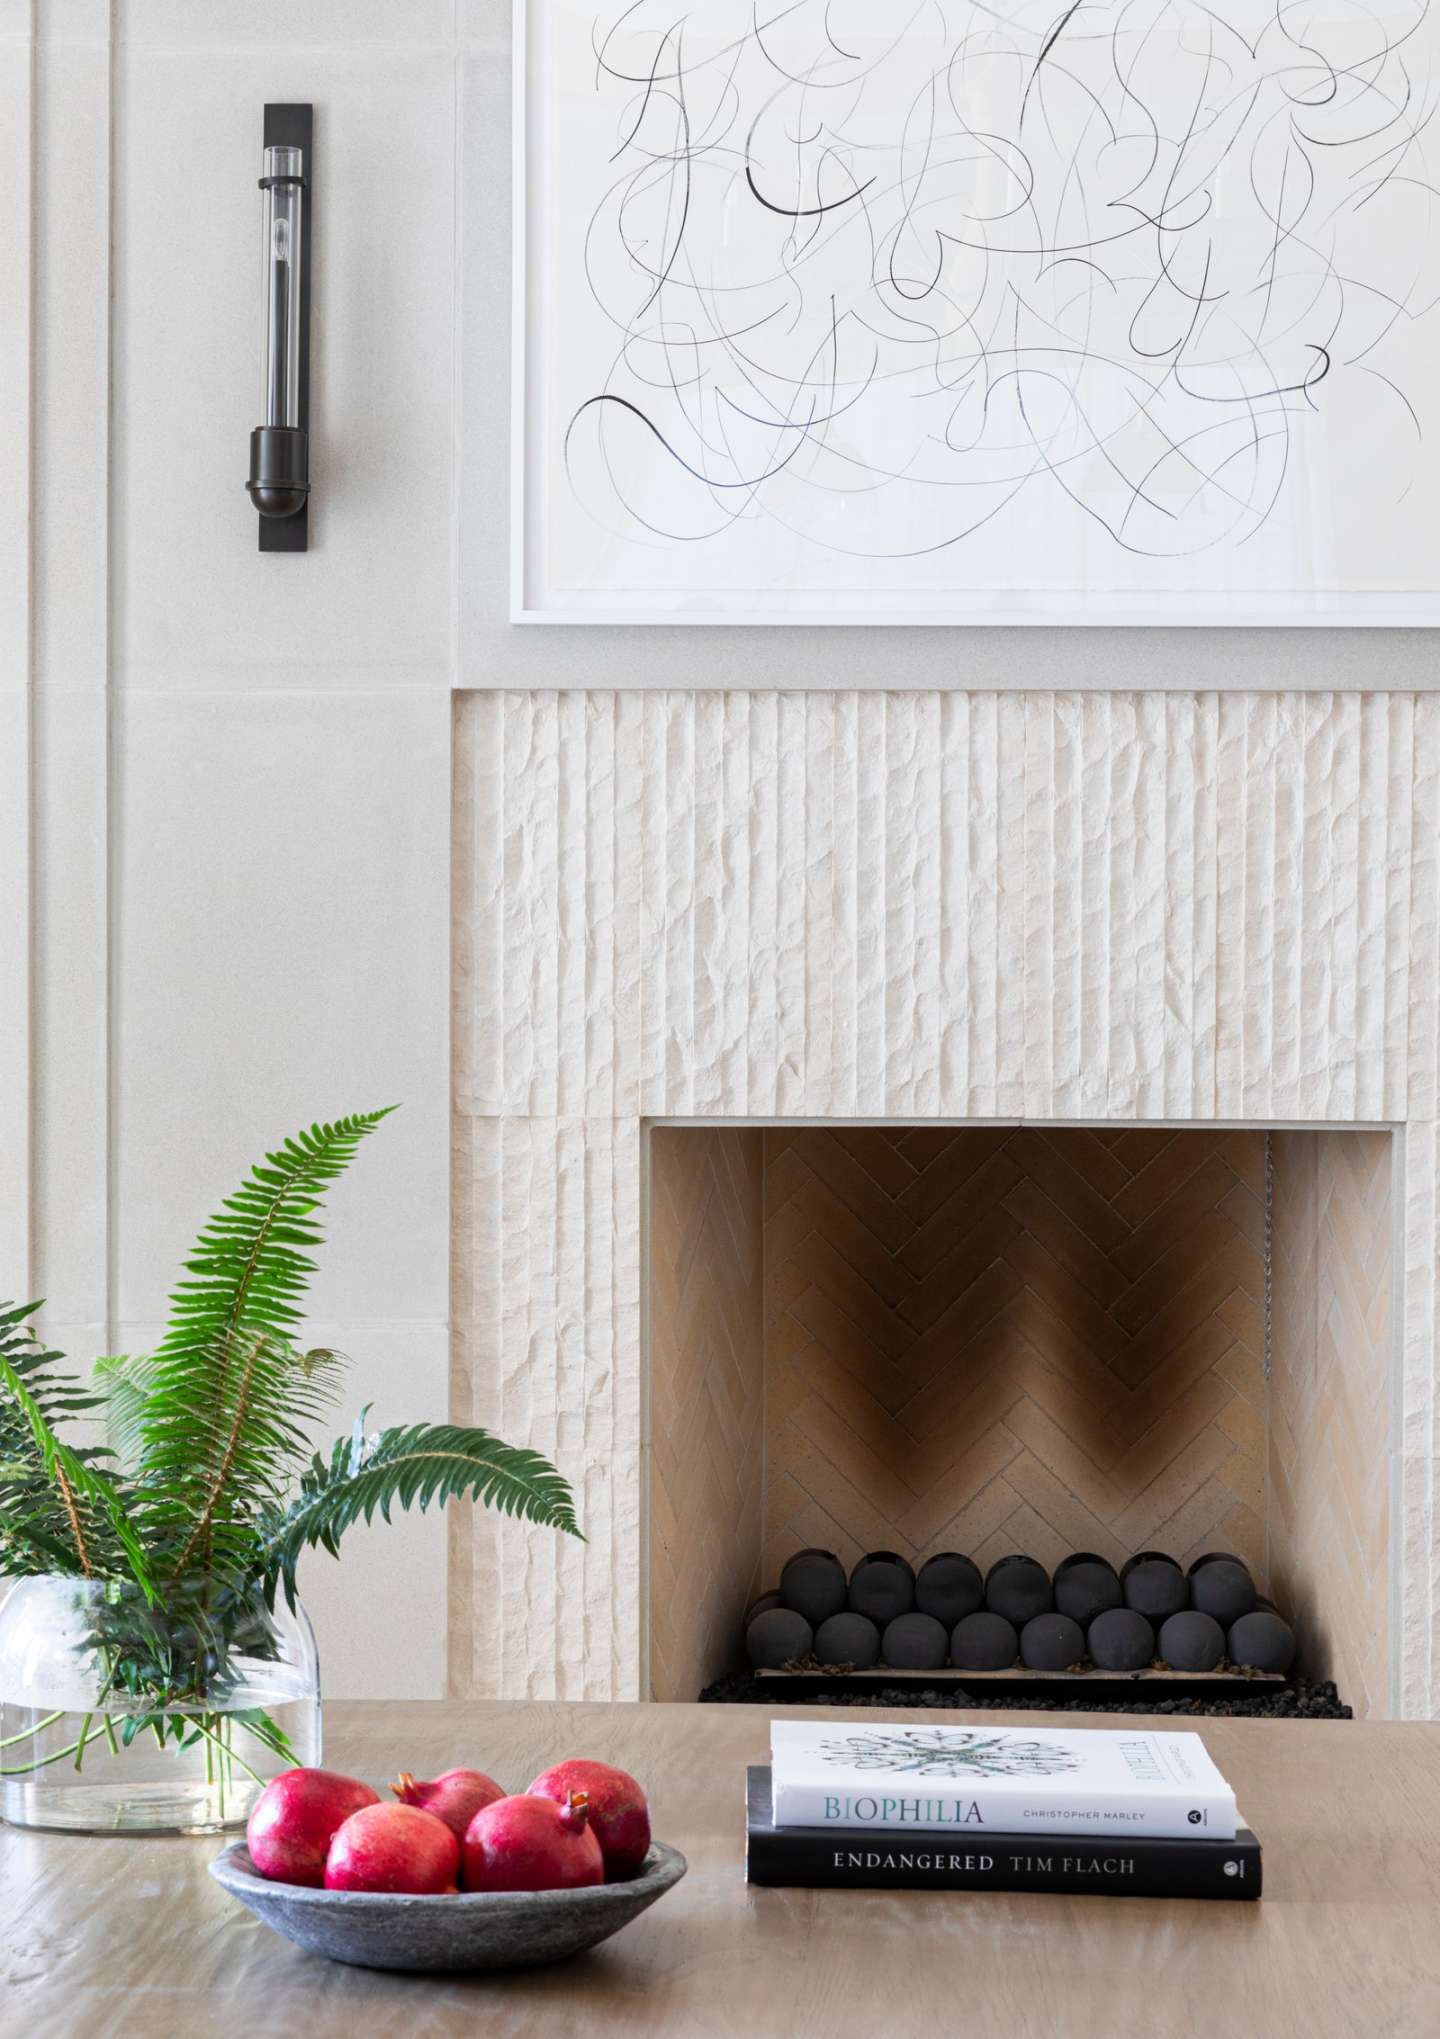 Fireplace Ideas That Make a Statement and Dress Up Any Room